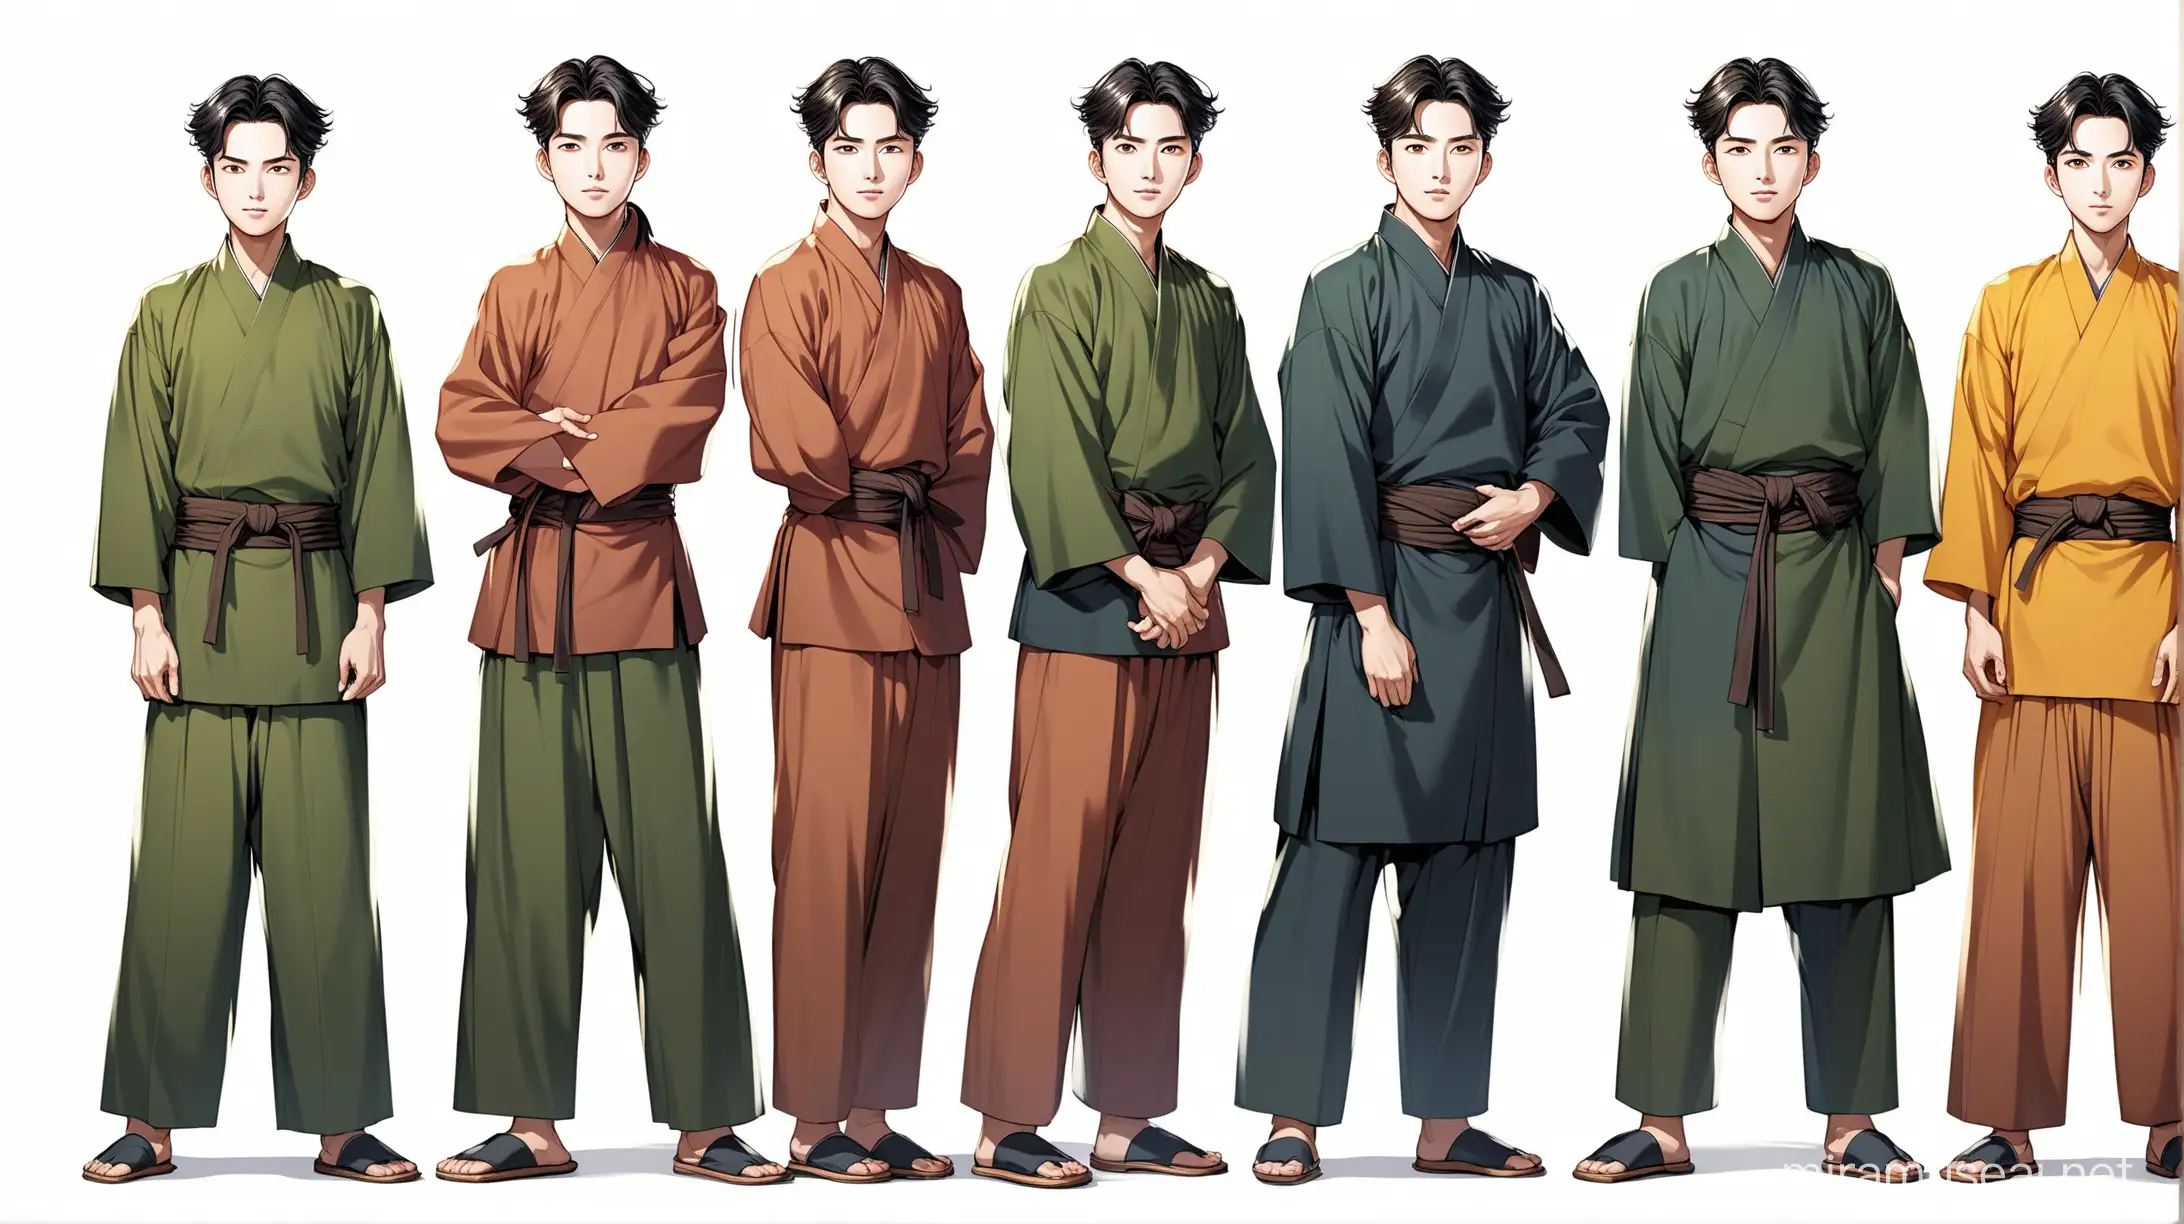 six Korean village men with various pose and expression, they all have the same face, each man has a different korean clothing style and different clothing colors, different pose, different face expression, full body shot, each person stand far away from each other, wide angle, plain white background